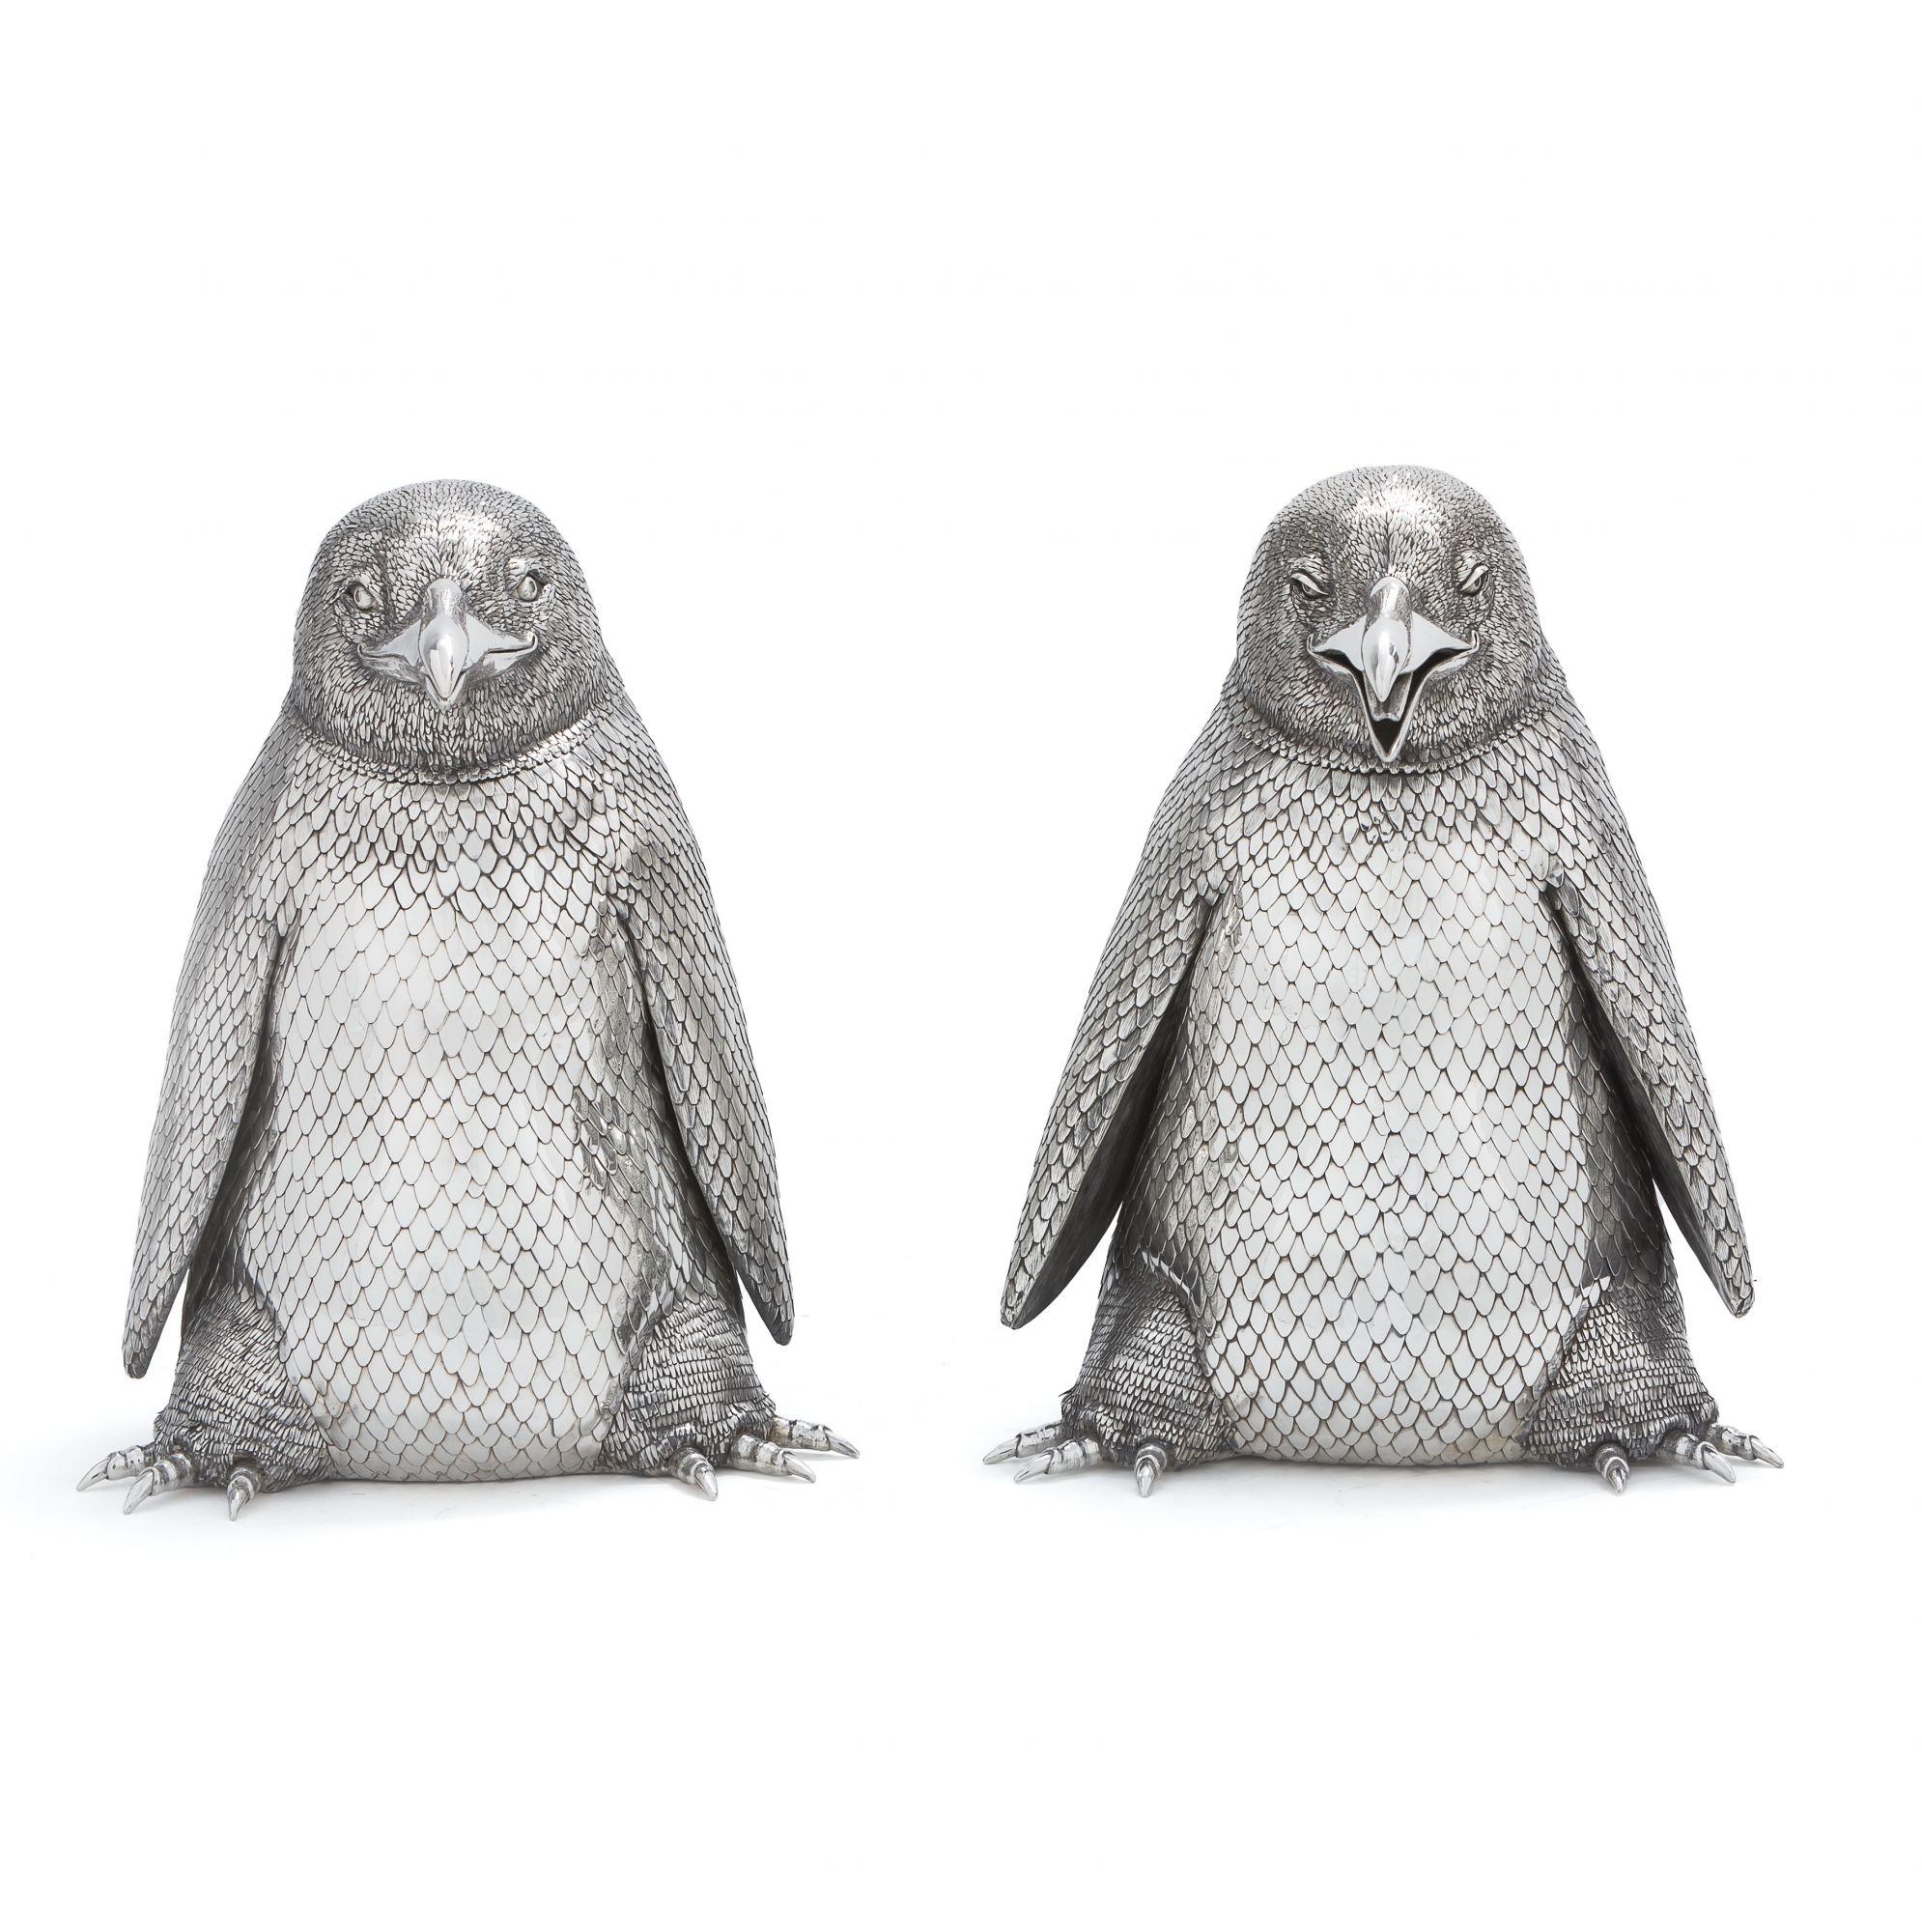 A pair of realistically modeled as a male and female penguins, the hinged heads opening to reveal a bottle compartment Mario Buccellati was one of the most remarkable Italian jewelers of the 20th century. His unique designs paying tribute to